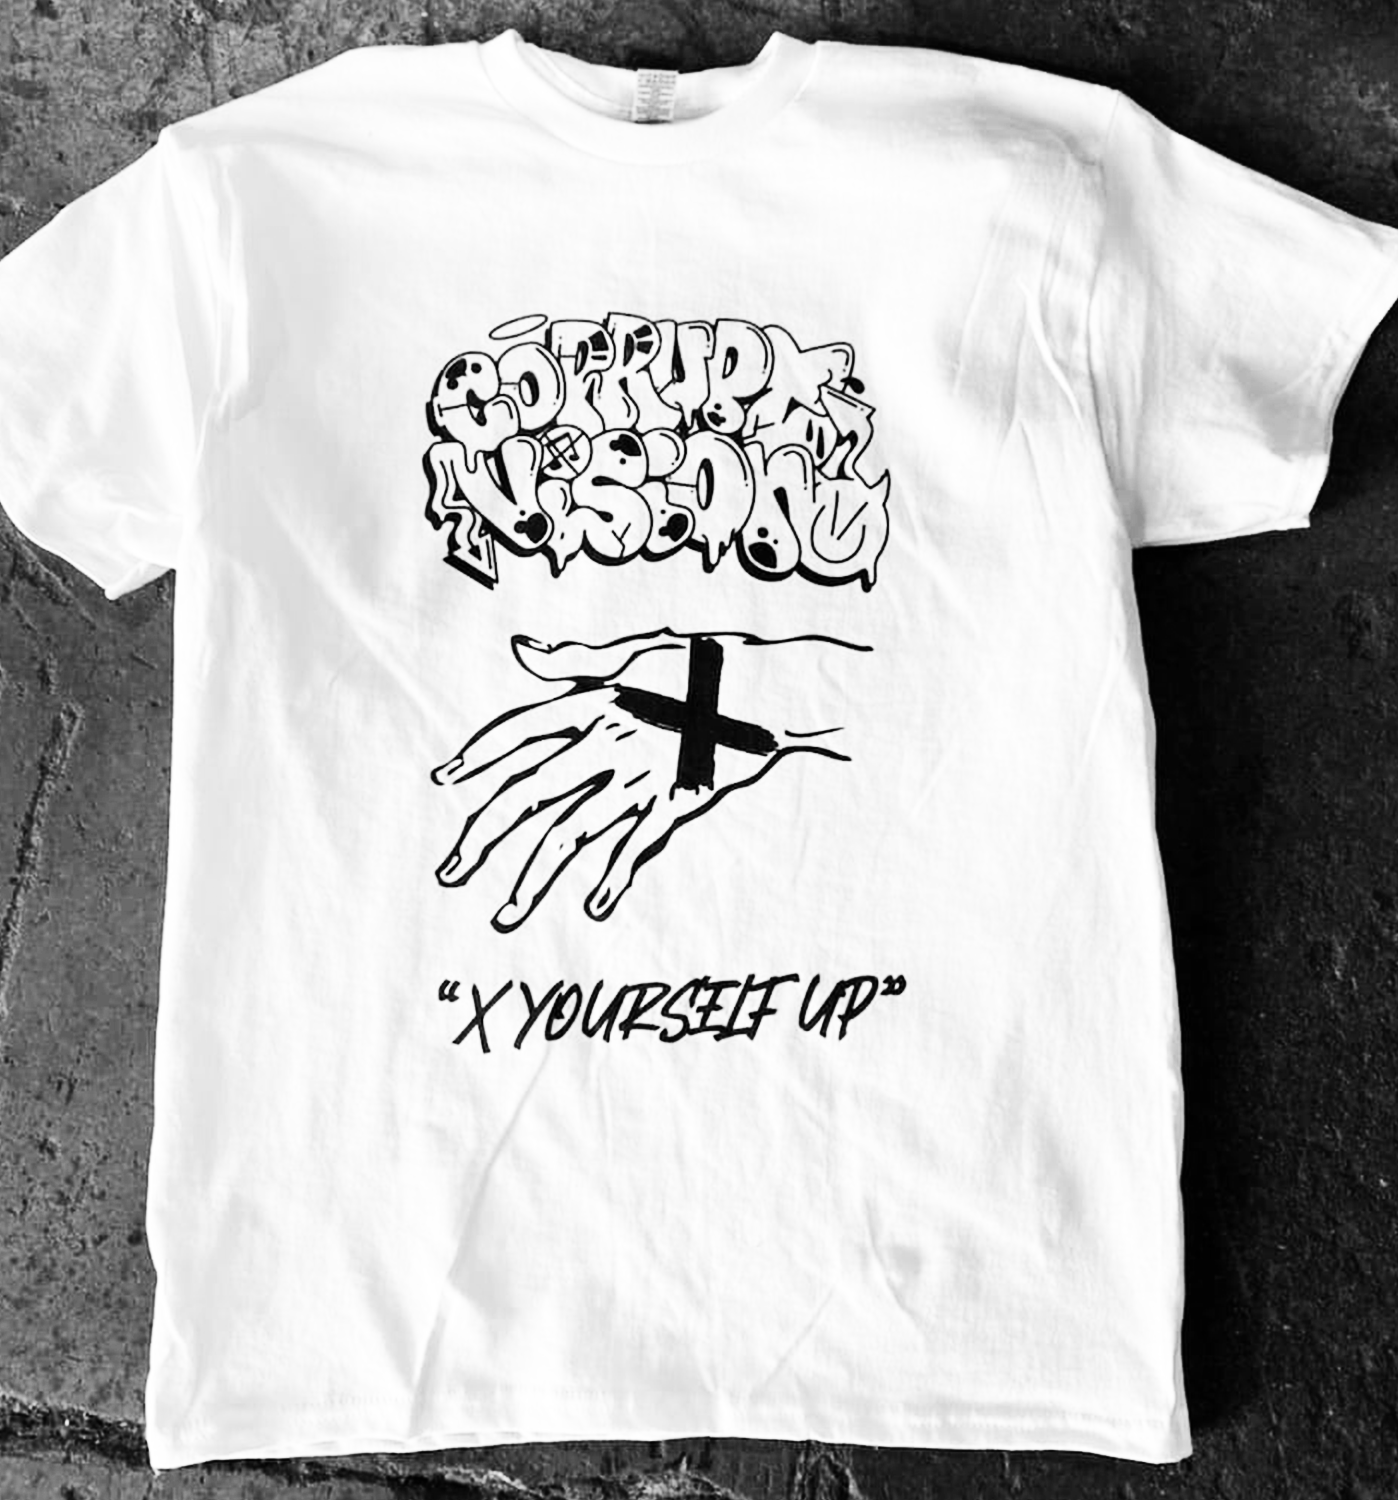 Corrupt Vision - "X YOURSELF UP" Shirt - SMALL